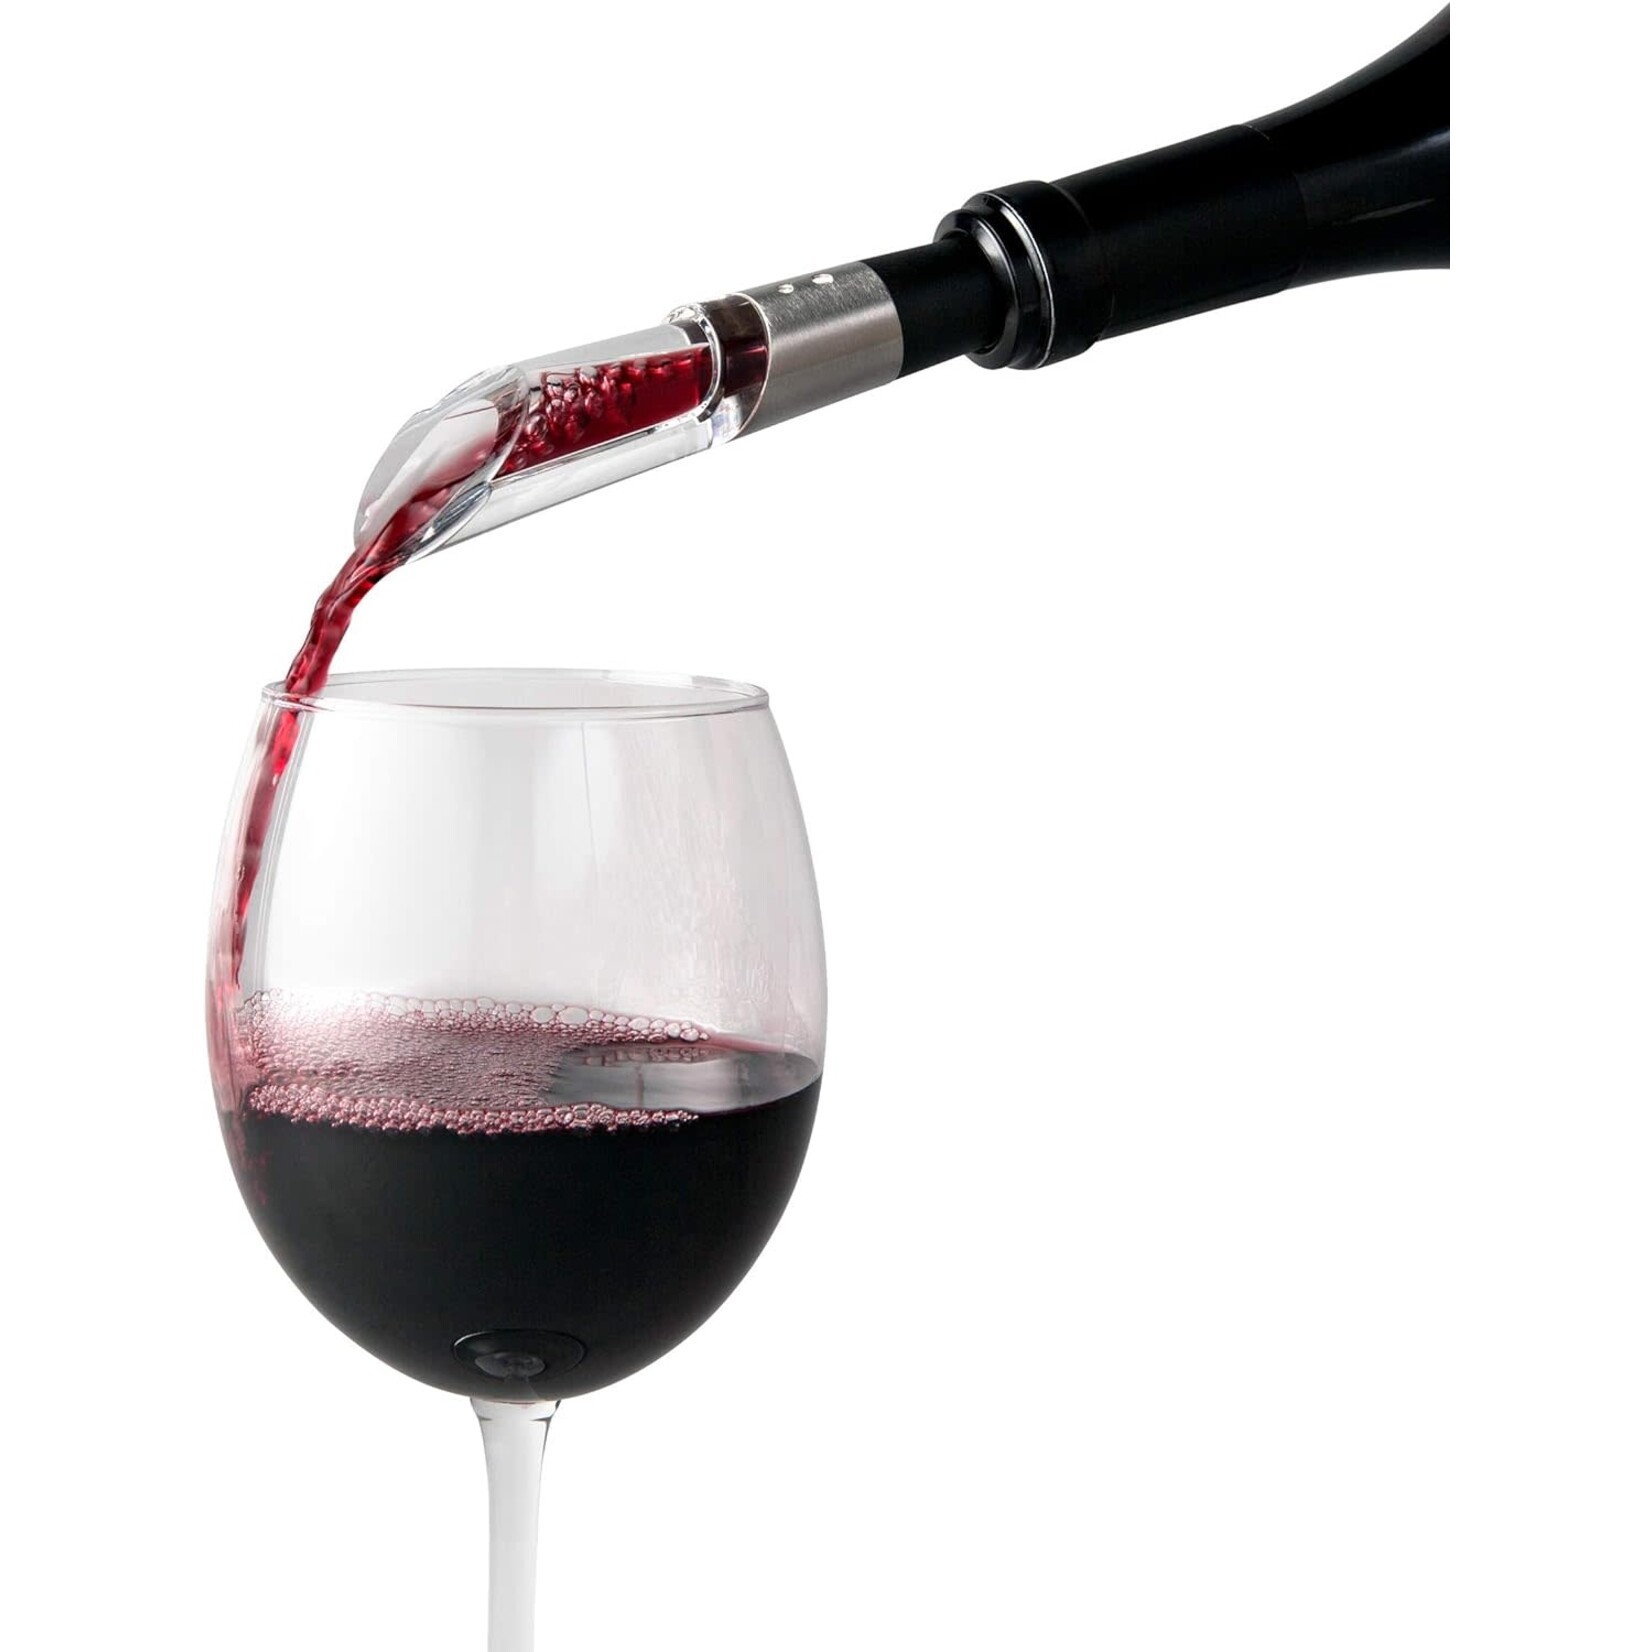 Rabbit Rabbit W6127 Wine Aerator and Pourer, 1.1 x 1.1 x 5.2 inches, Clear/Stainless Steel